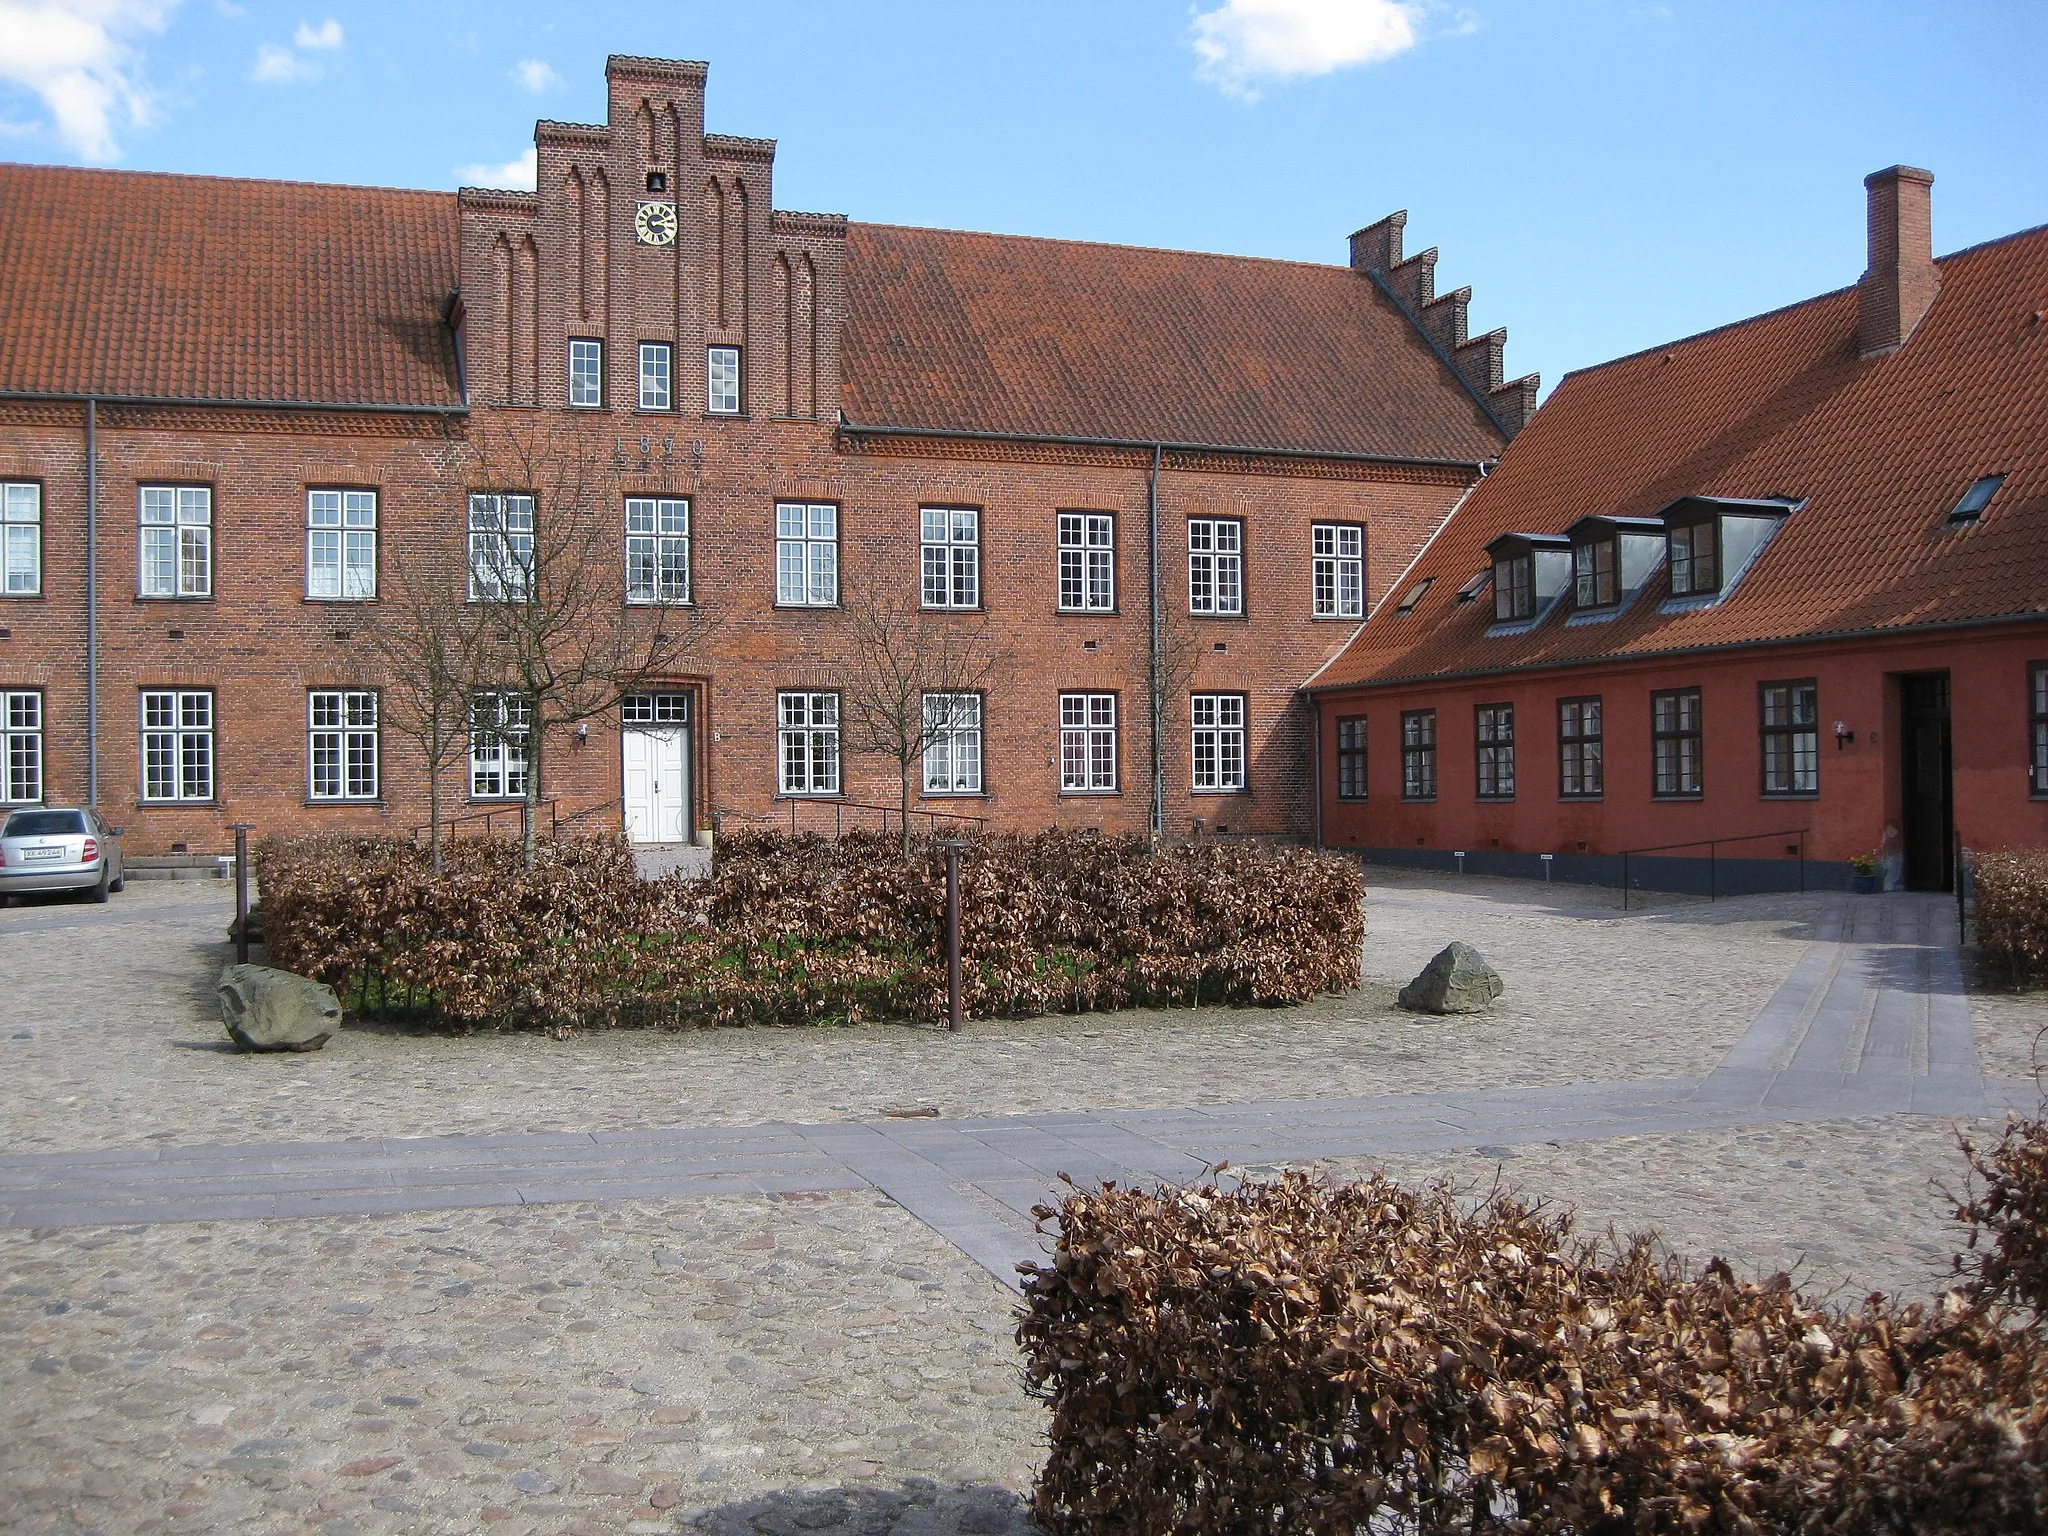 Photo showing: The courtyard of the monastery "Slagelse Kloster" in Slagelse. The town is located in West Zealand, Denmark.